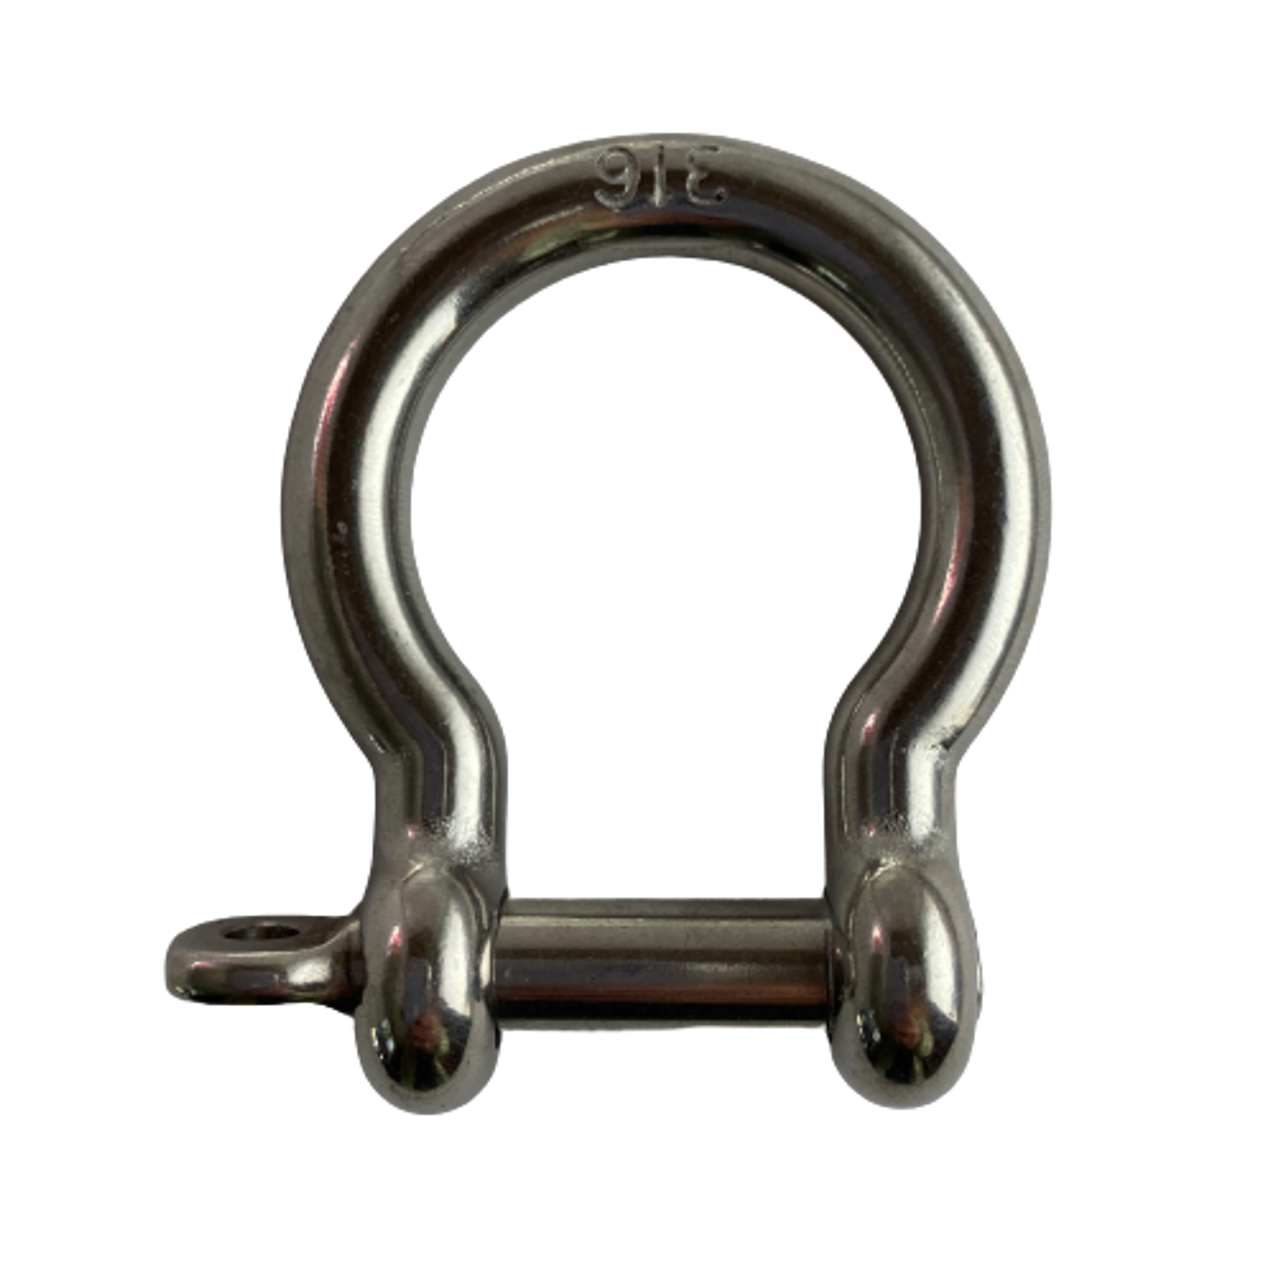 Marine Grade 10mm 2 Pieces Stainless Steel 316 Anti-Off Bow Shackle with Locking Ring 3/8 